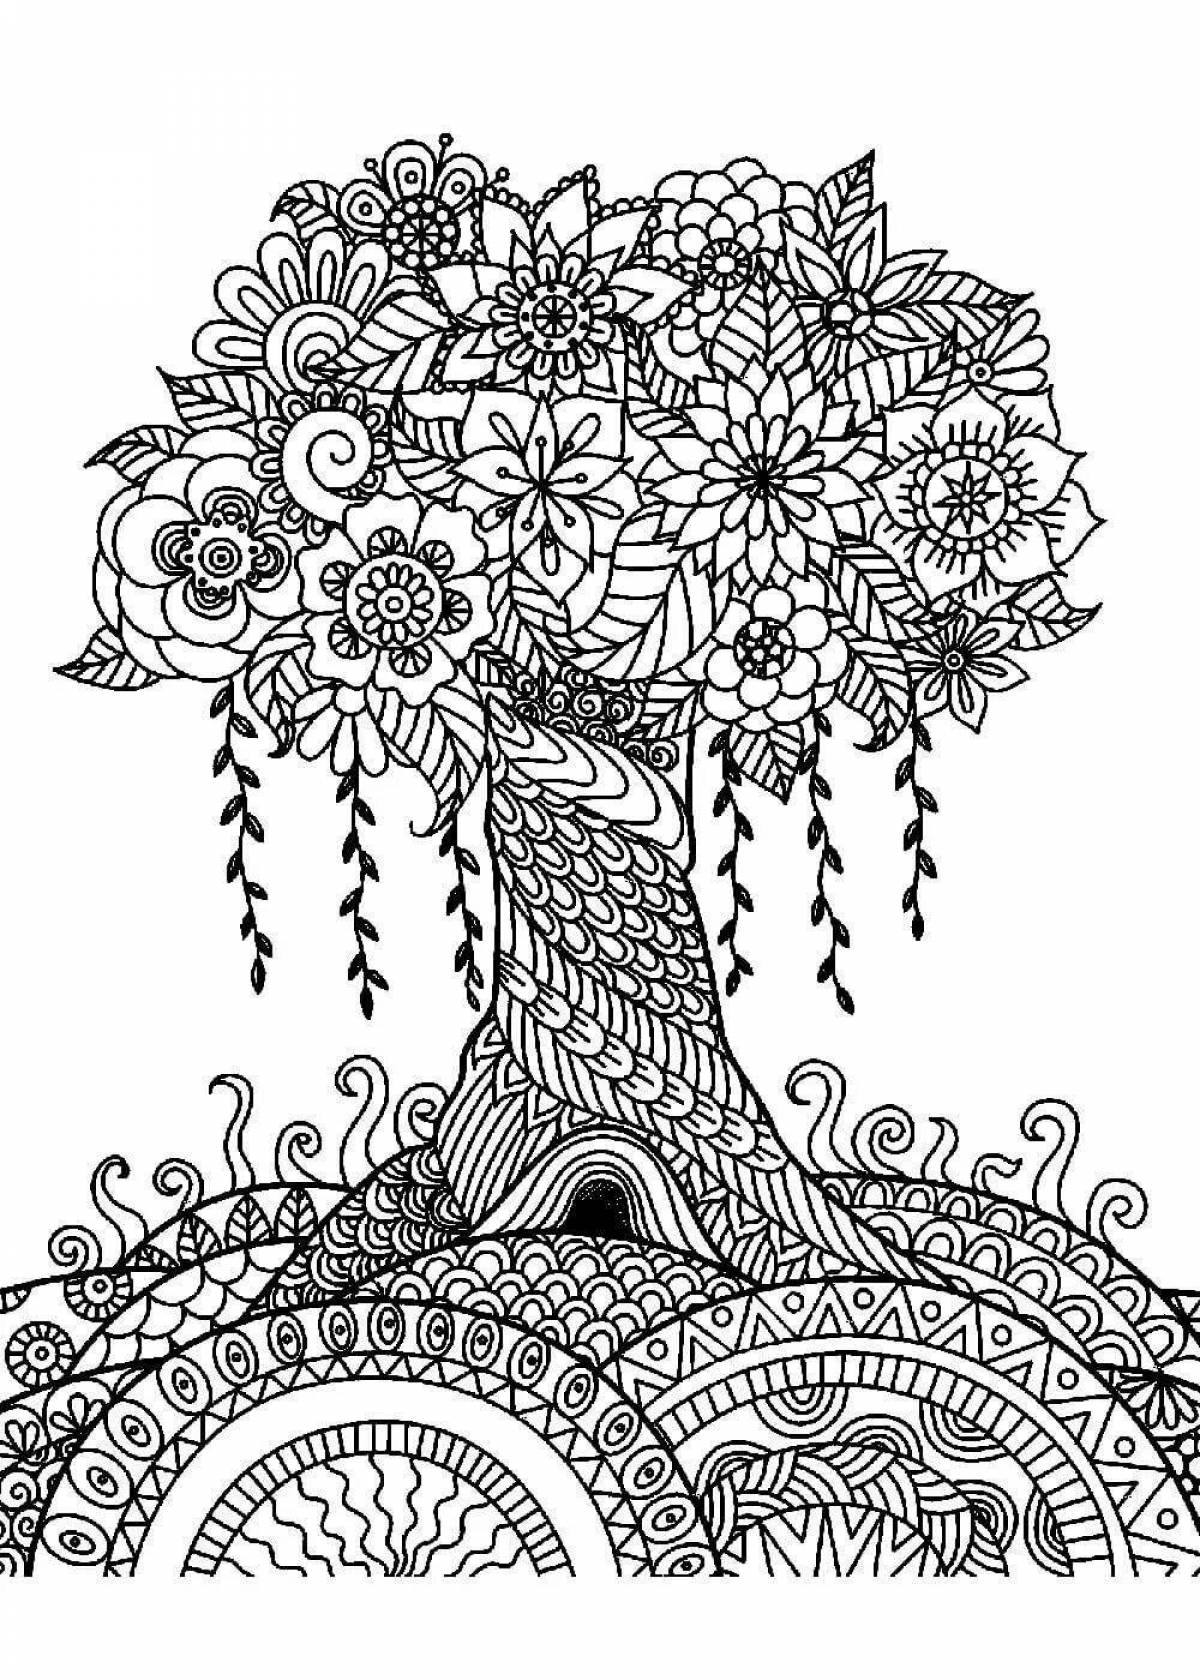 Coloring book exalted magic tree